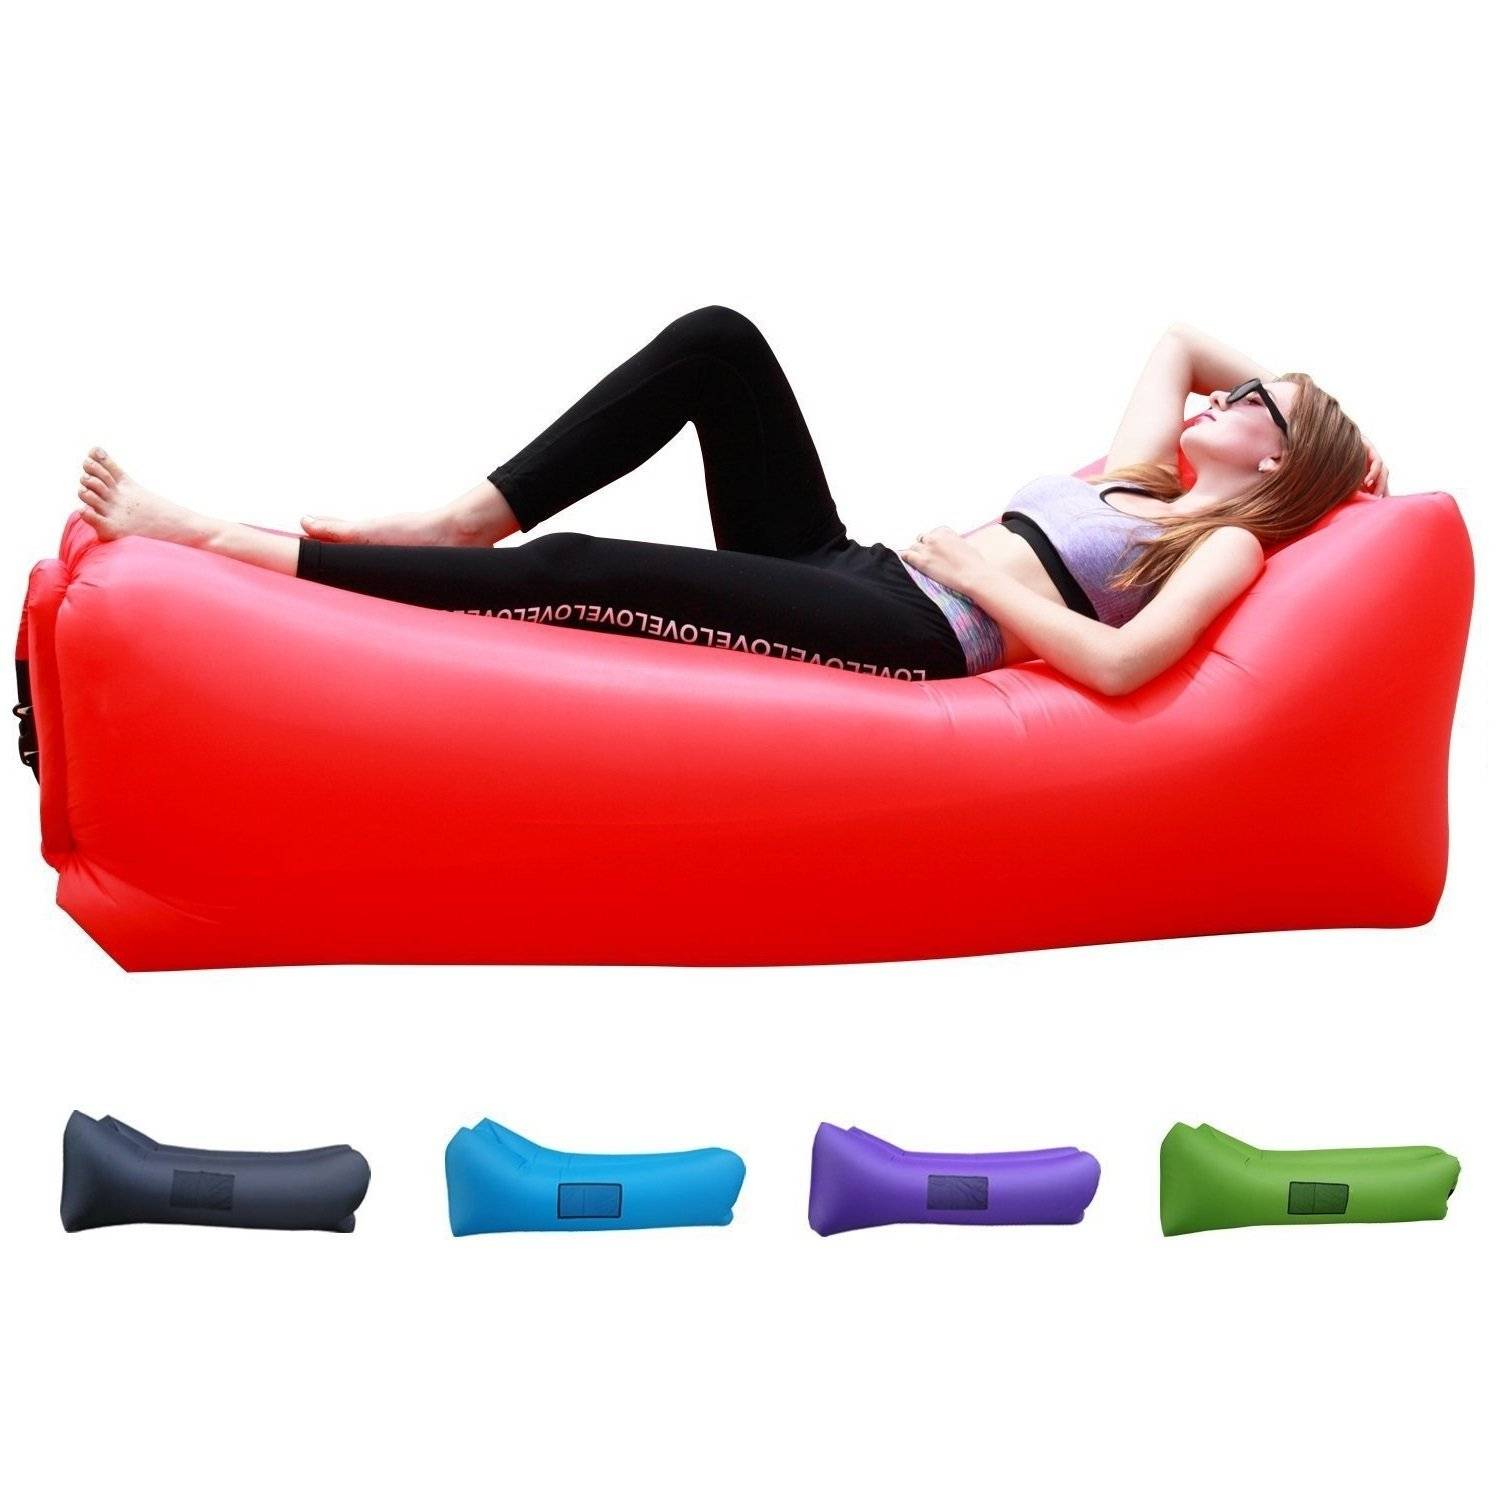 Easycouch Inflatable Waterproof Ripstop Lounger With Travel Bag